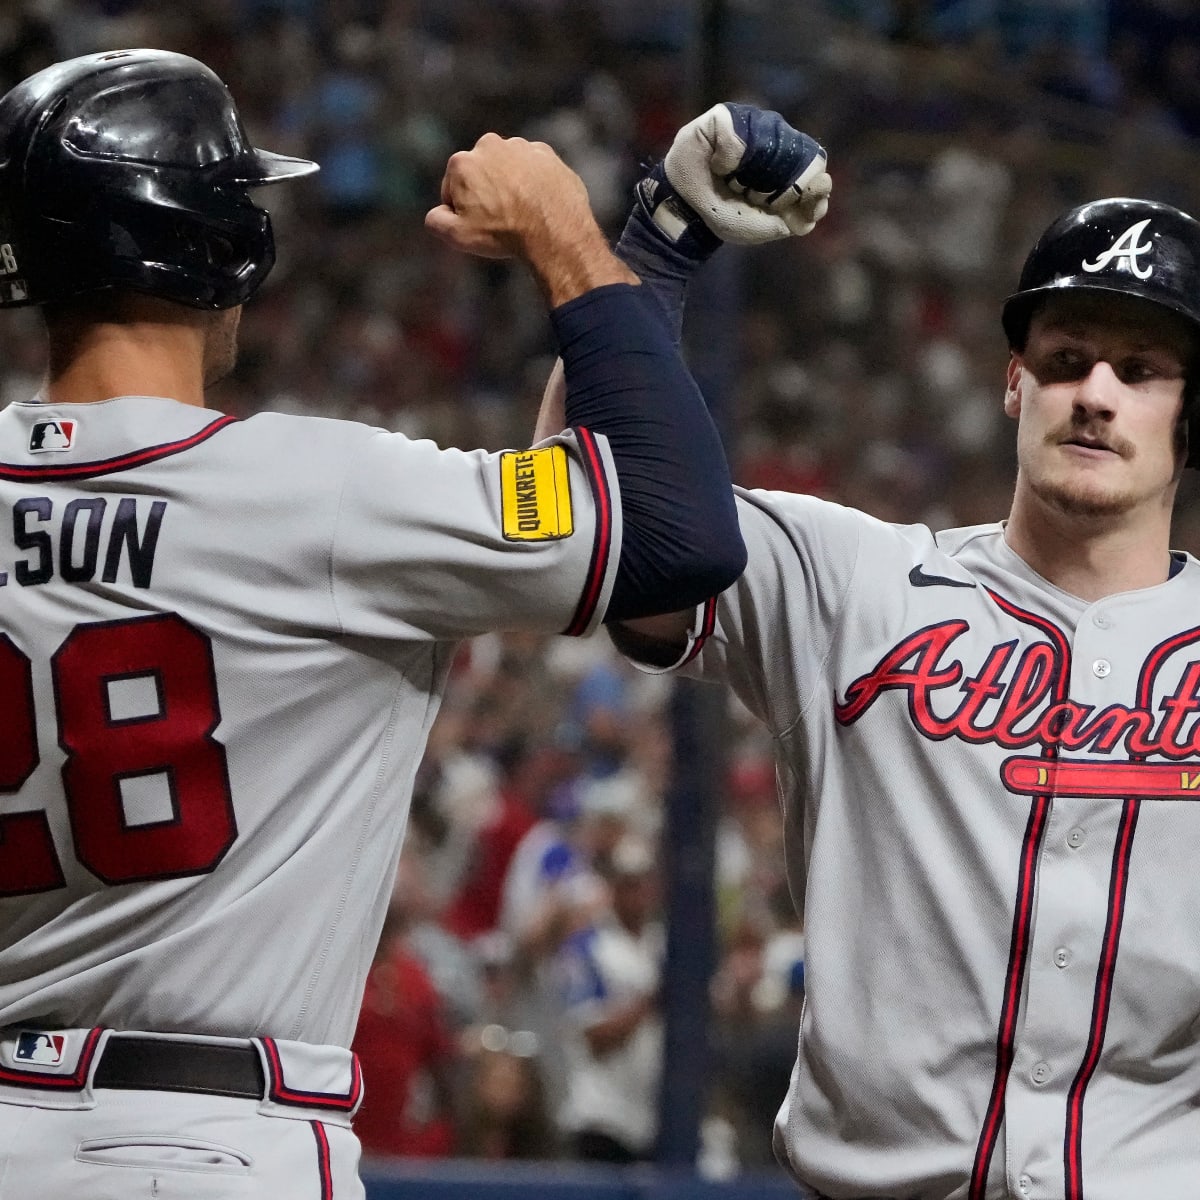 Fried dominates, retires first 14, as Braves edge Rays 2-1